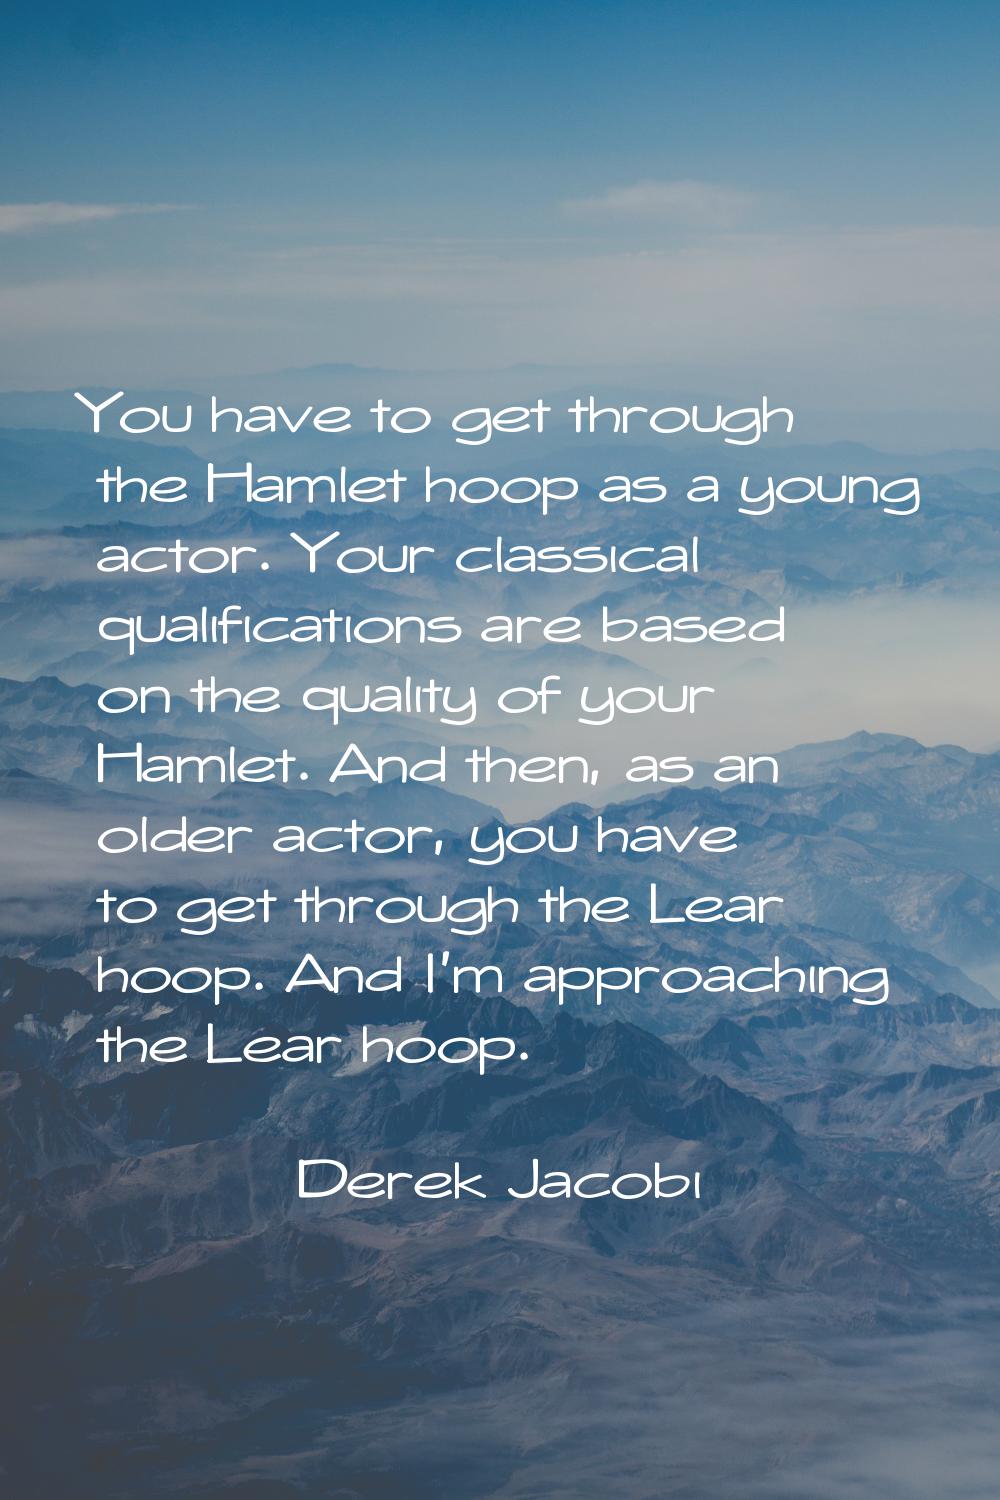 You have to get through the Hamlet hoop as a young actor. Your classical qualifications are based o